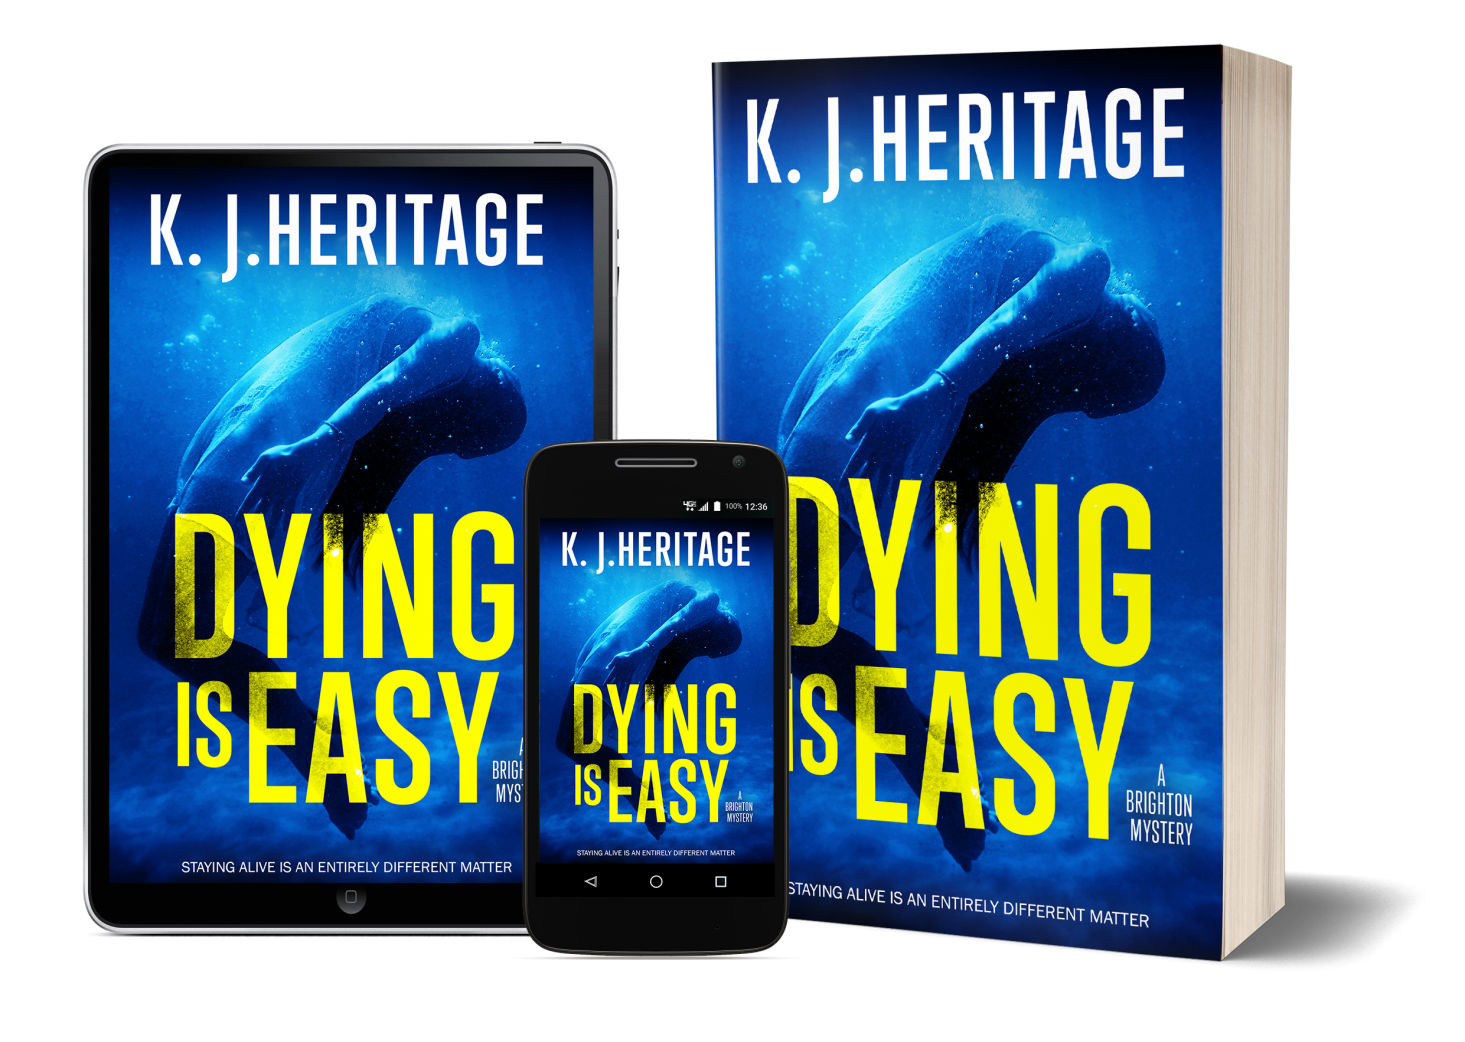 Dying Is Easy by Kevan Heritage